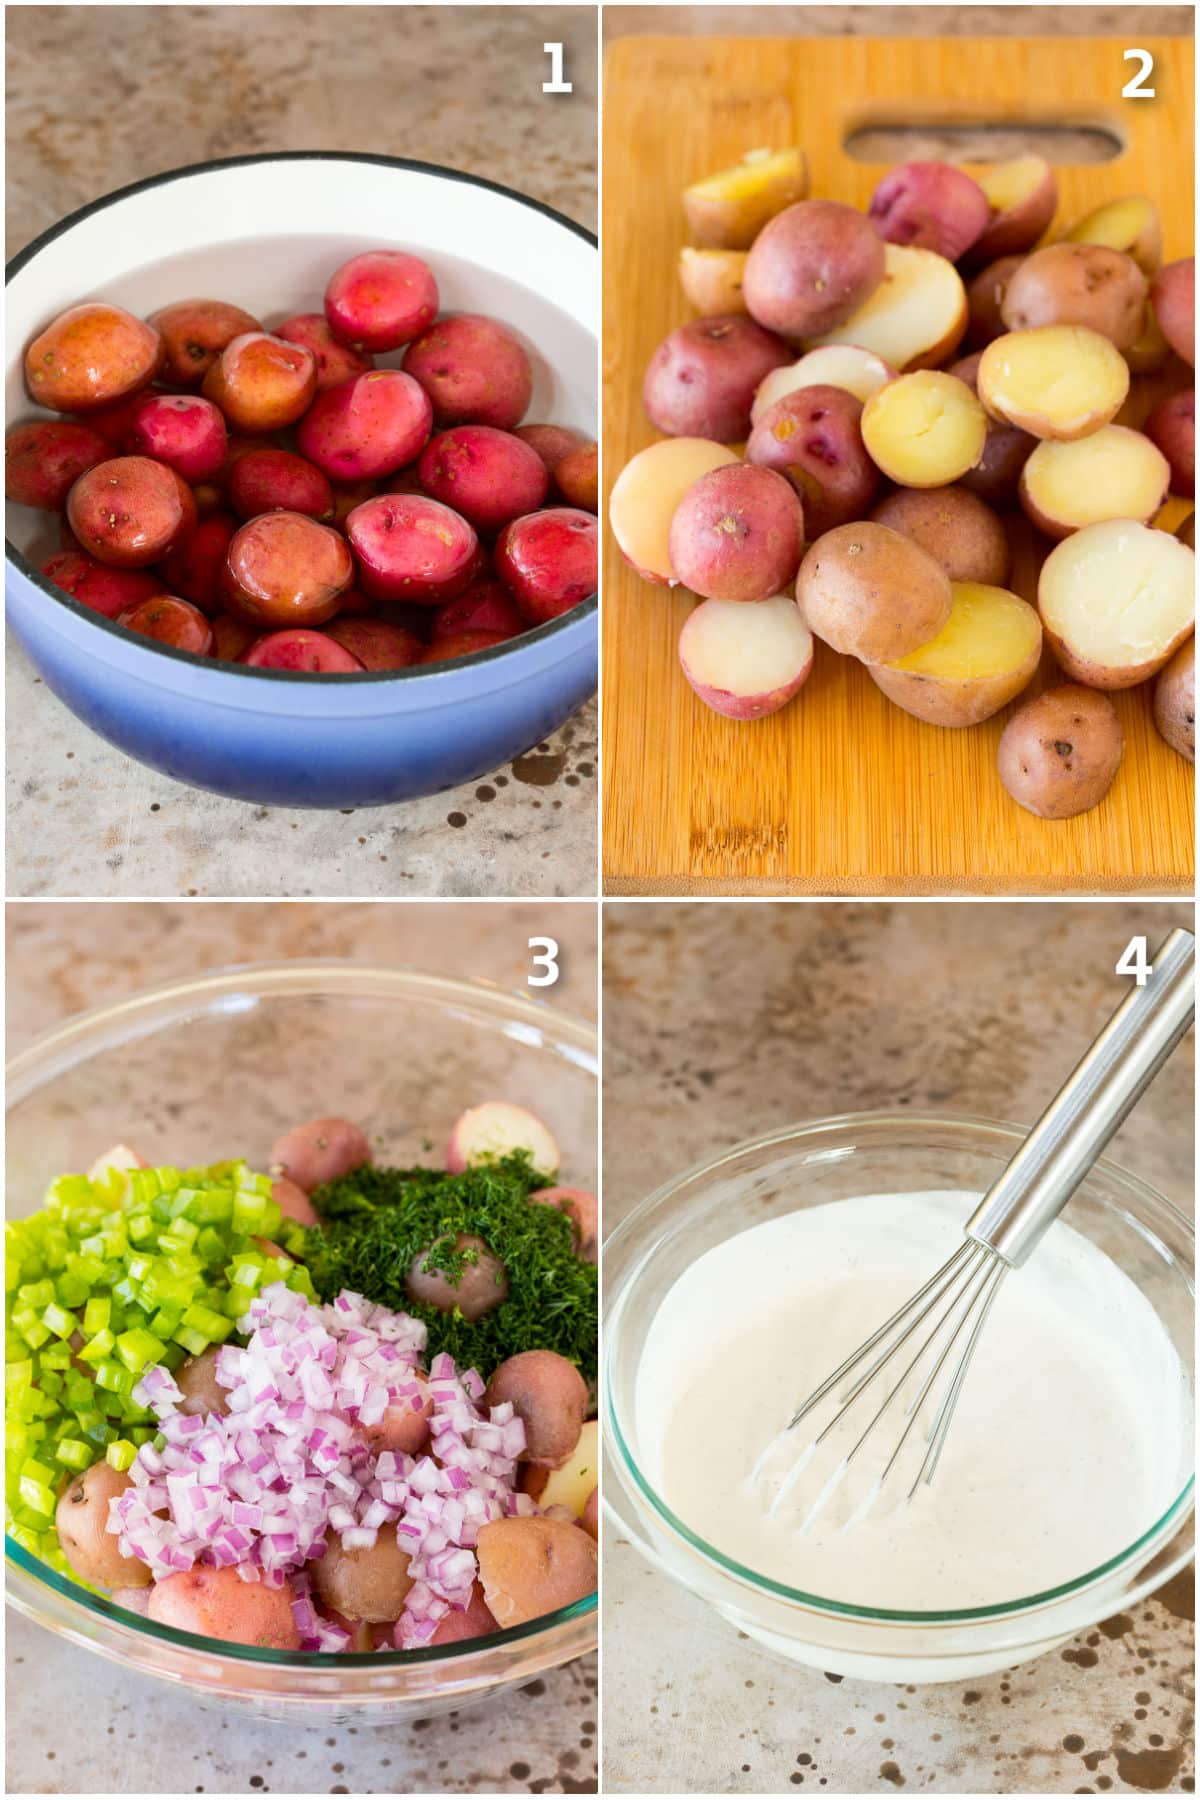 Step by step shots showing how to boil potatoes and assemble potato salad.